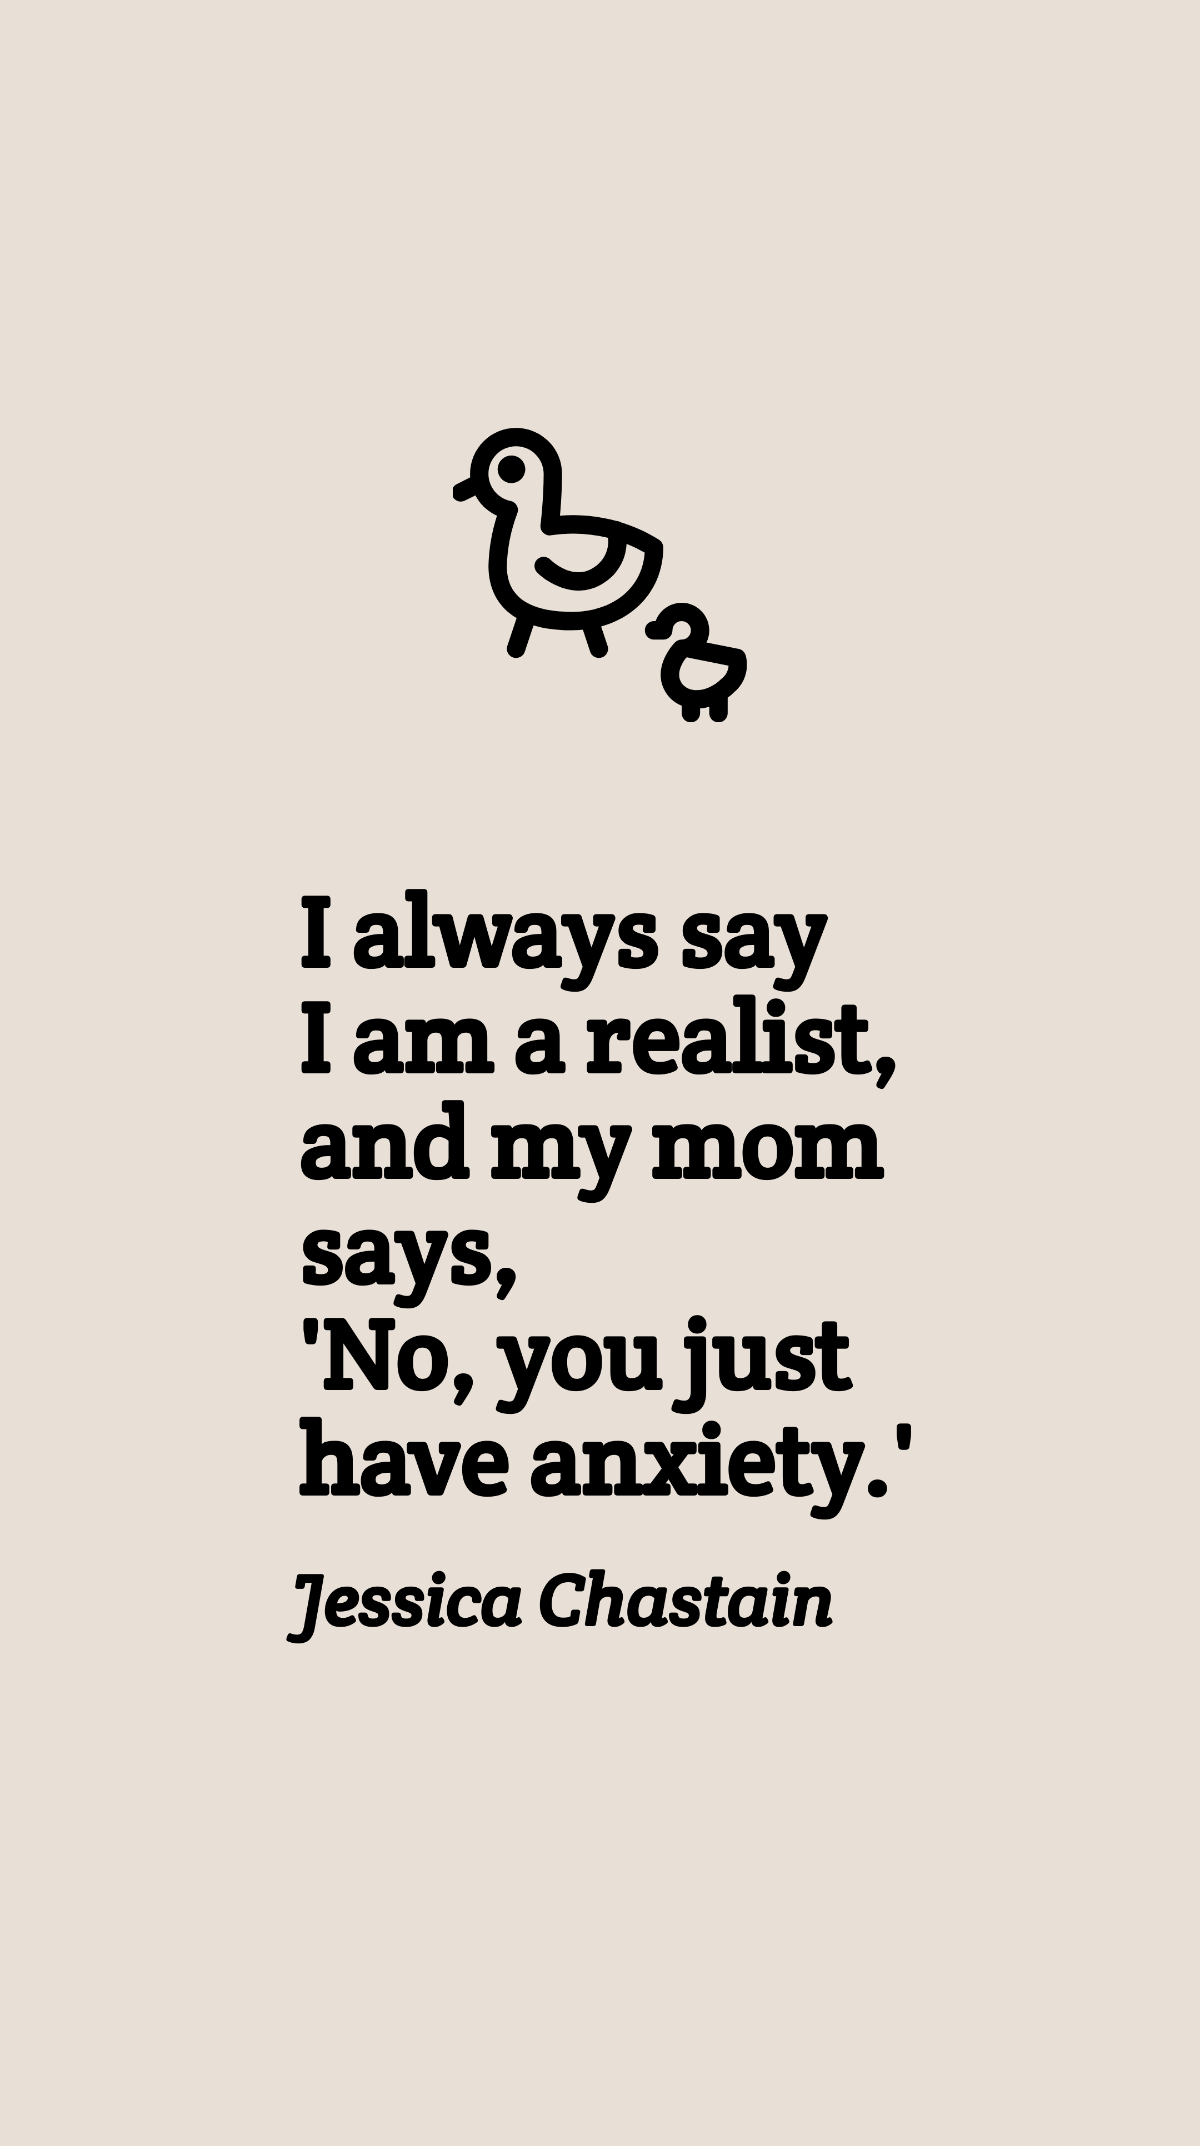 Jessica Chastain - I always say I am a realist, and my mom says, 'No, you just have anxiety.' Template